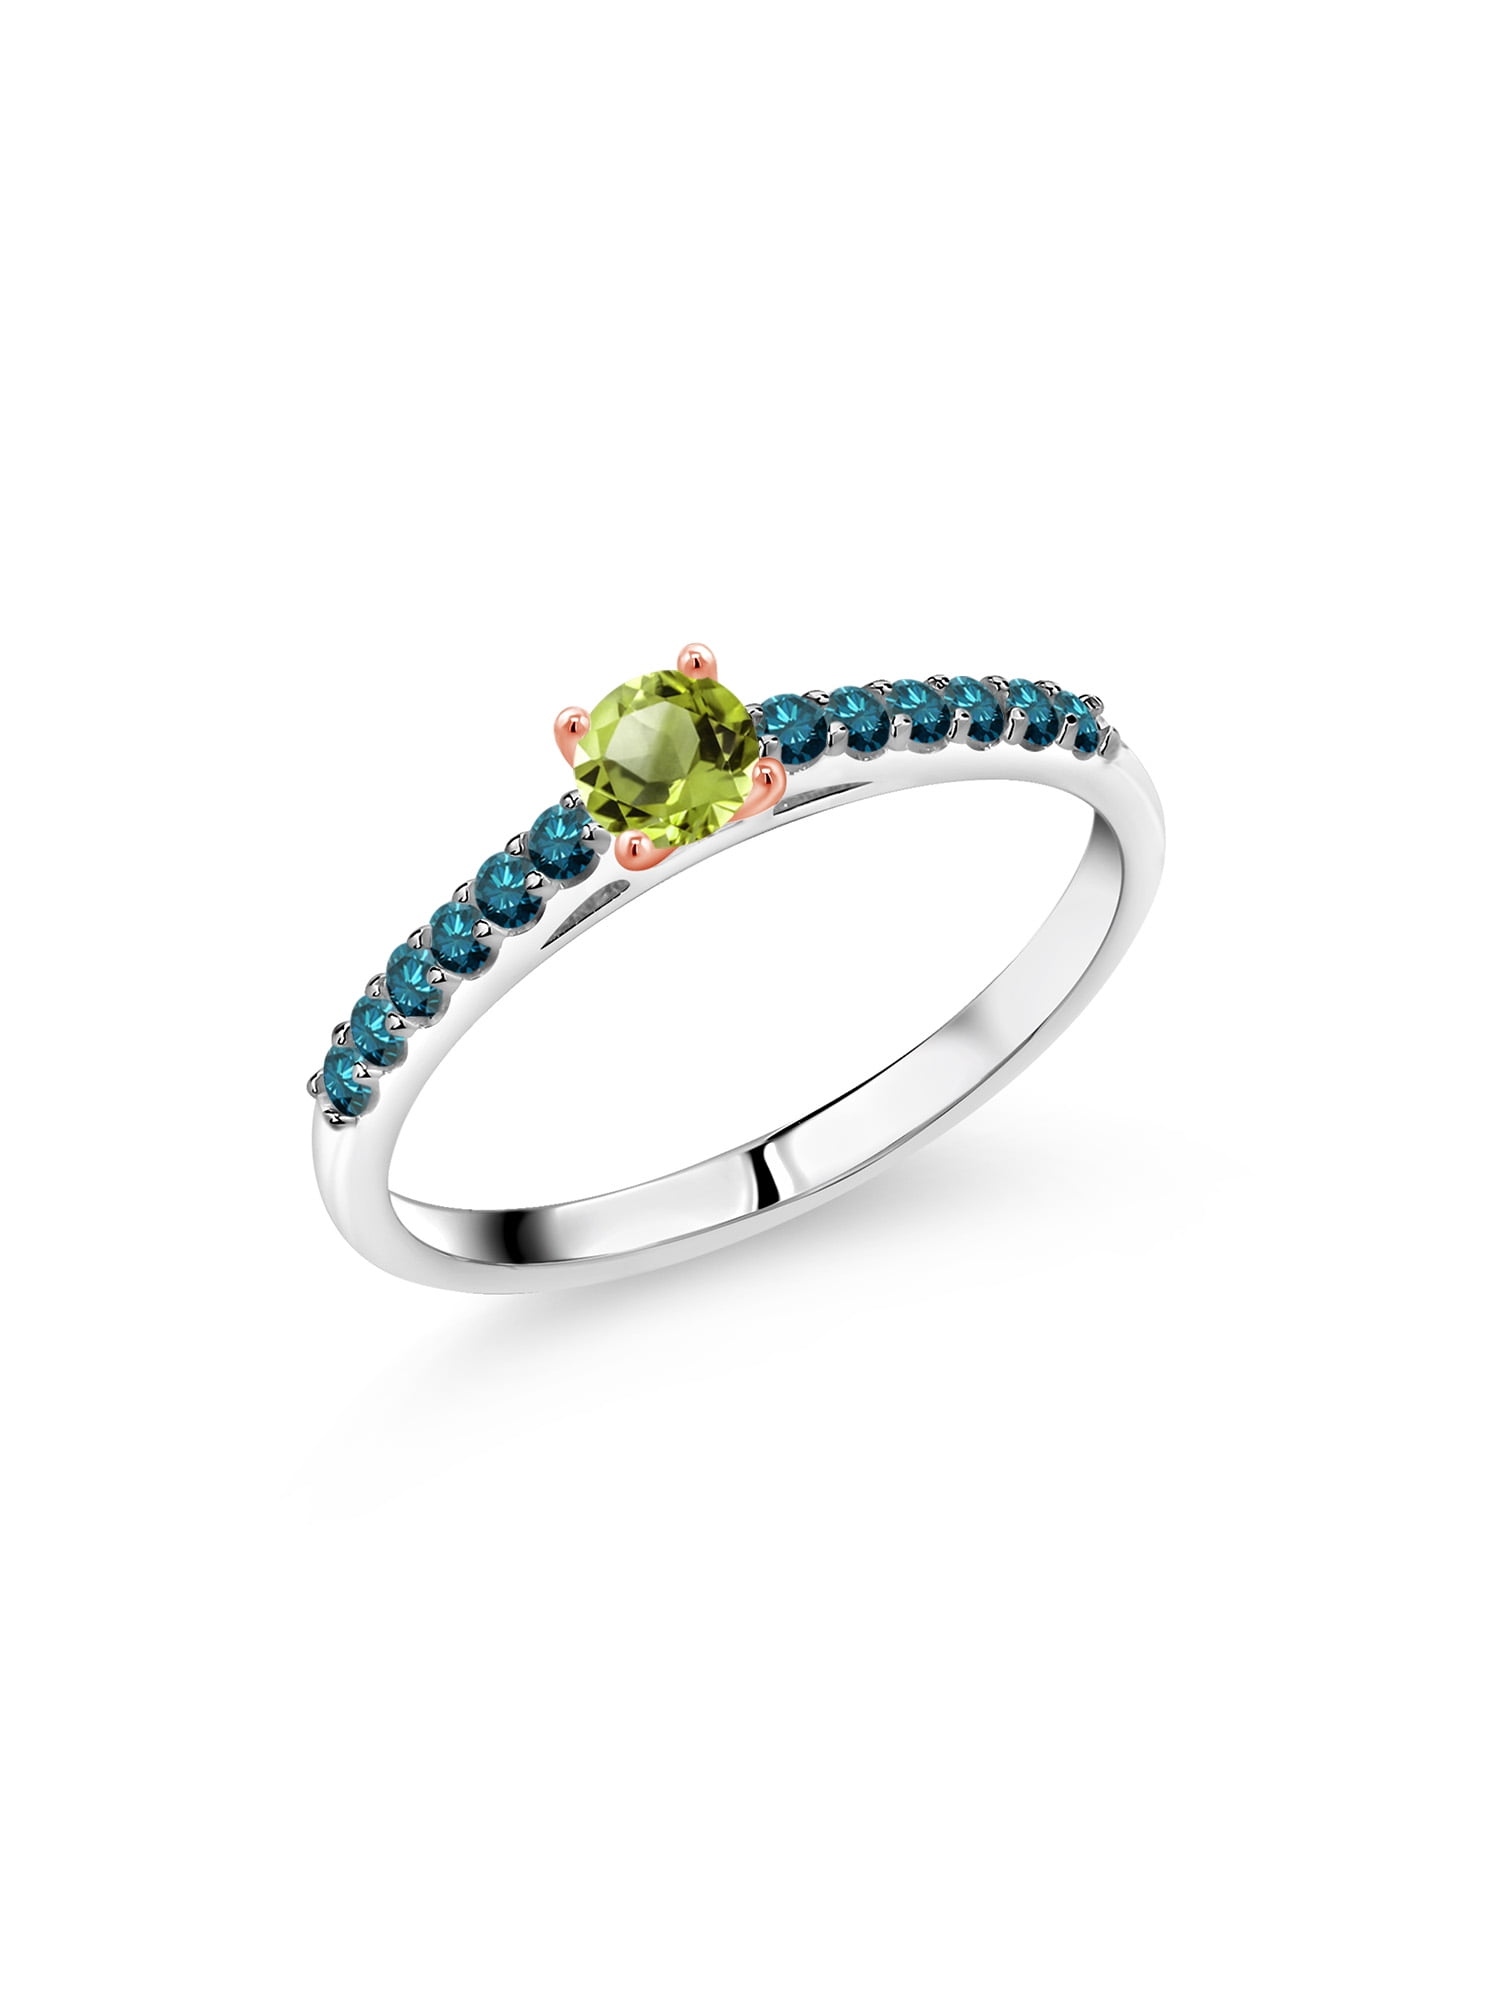 Gem Stone King 925 Sterling Silver Green Peridot 3-Stone Ring for Women 2.11 Ct Oval Gemstone Birthstone, Available in size 5, 6, 7, 8, 9